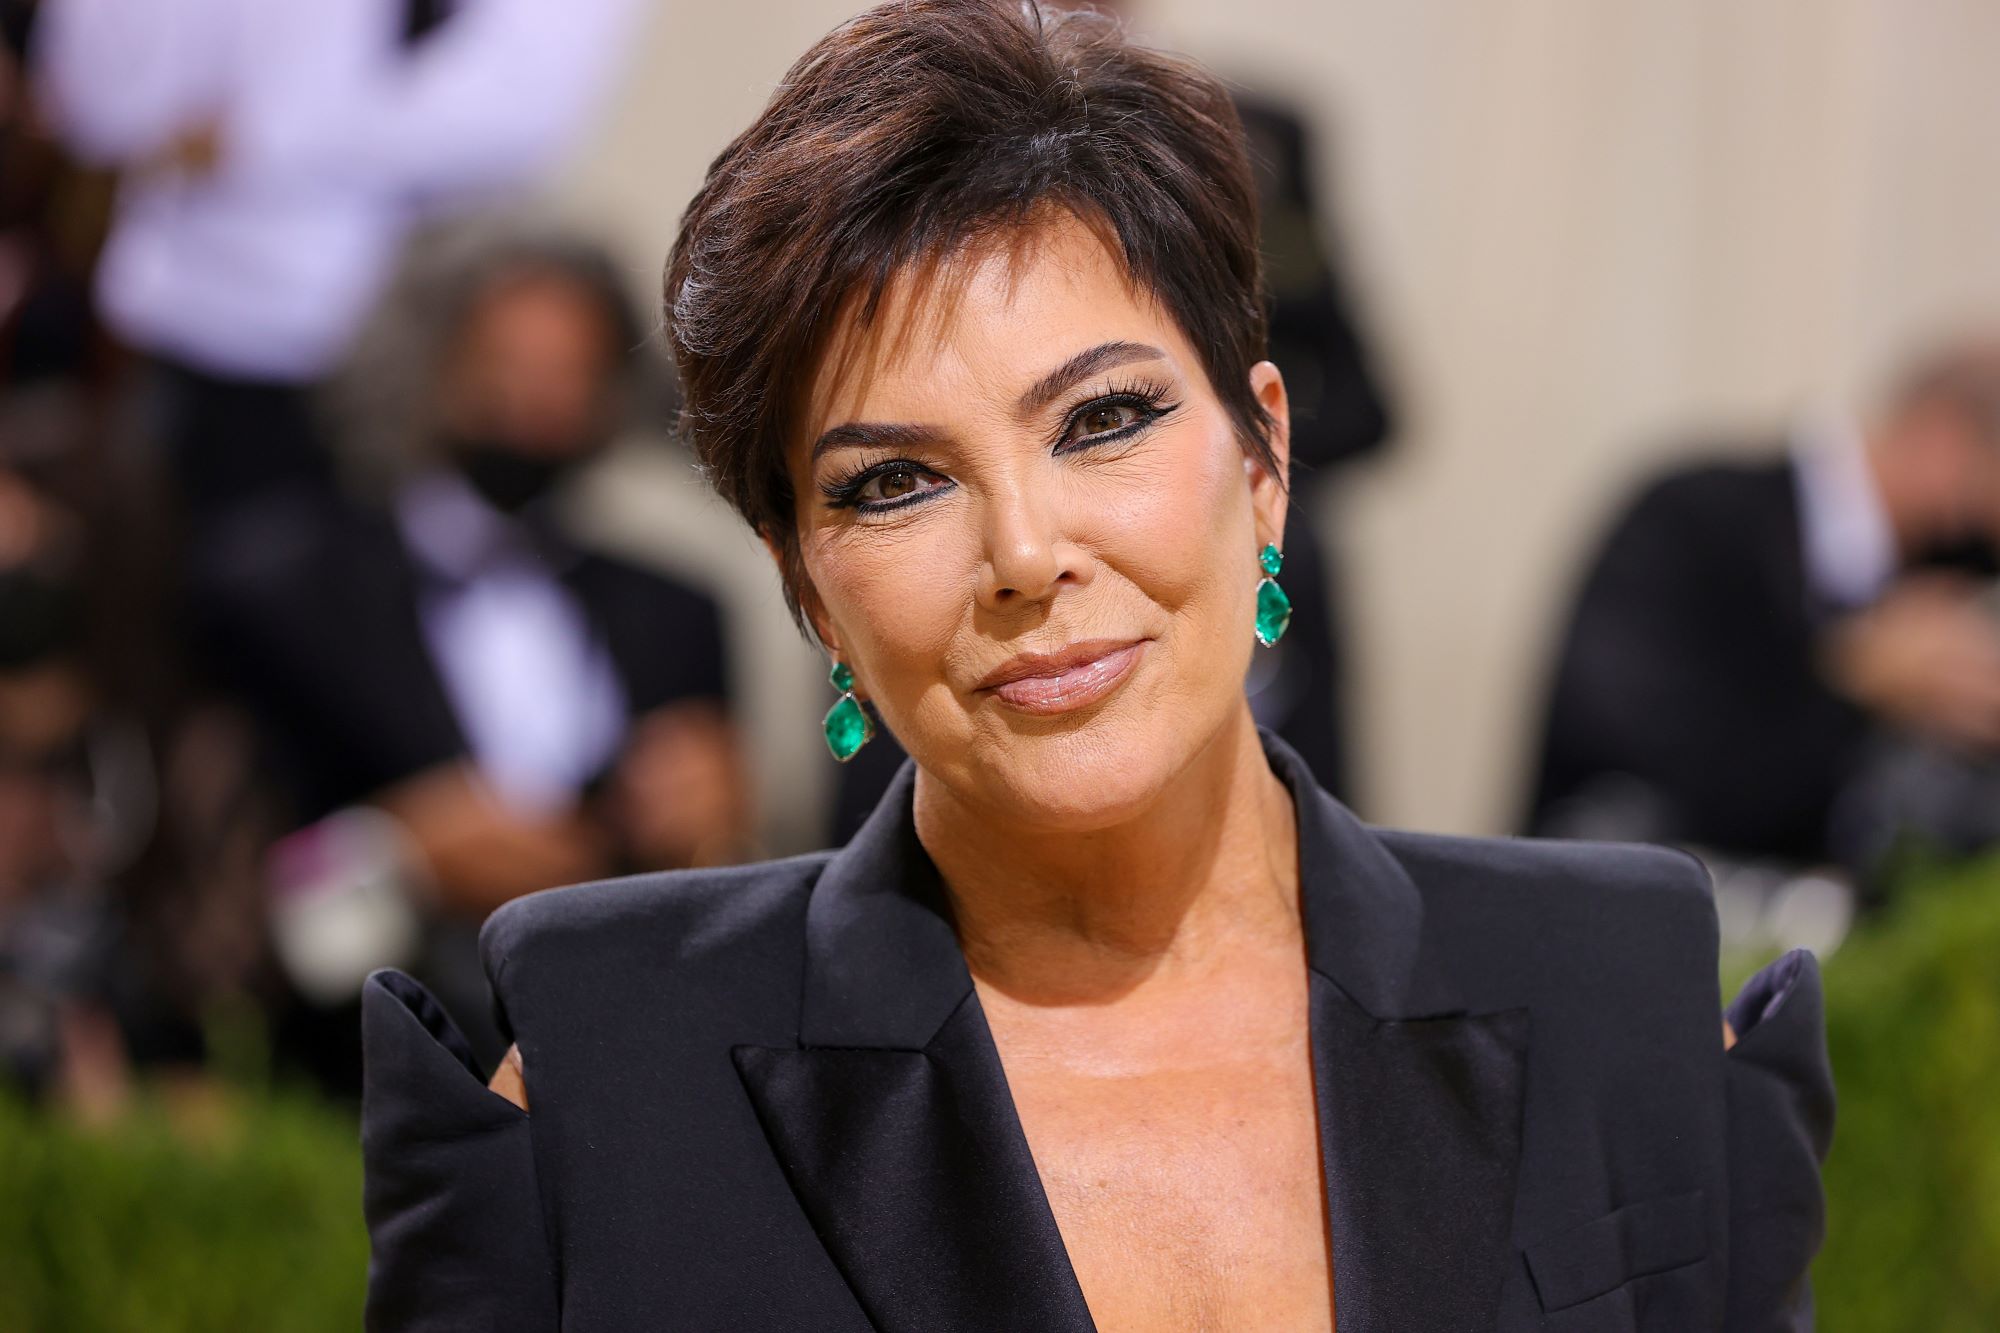 Kris Kardashian dressed in a black suit jacket with a blurred background of various people.